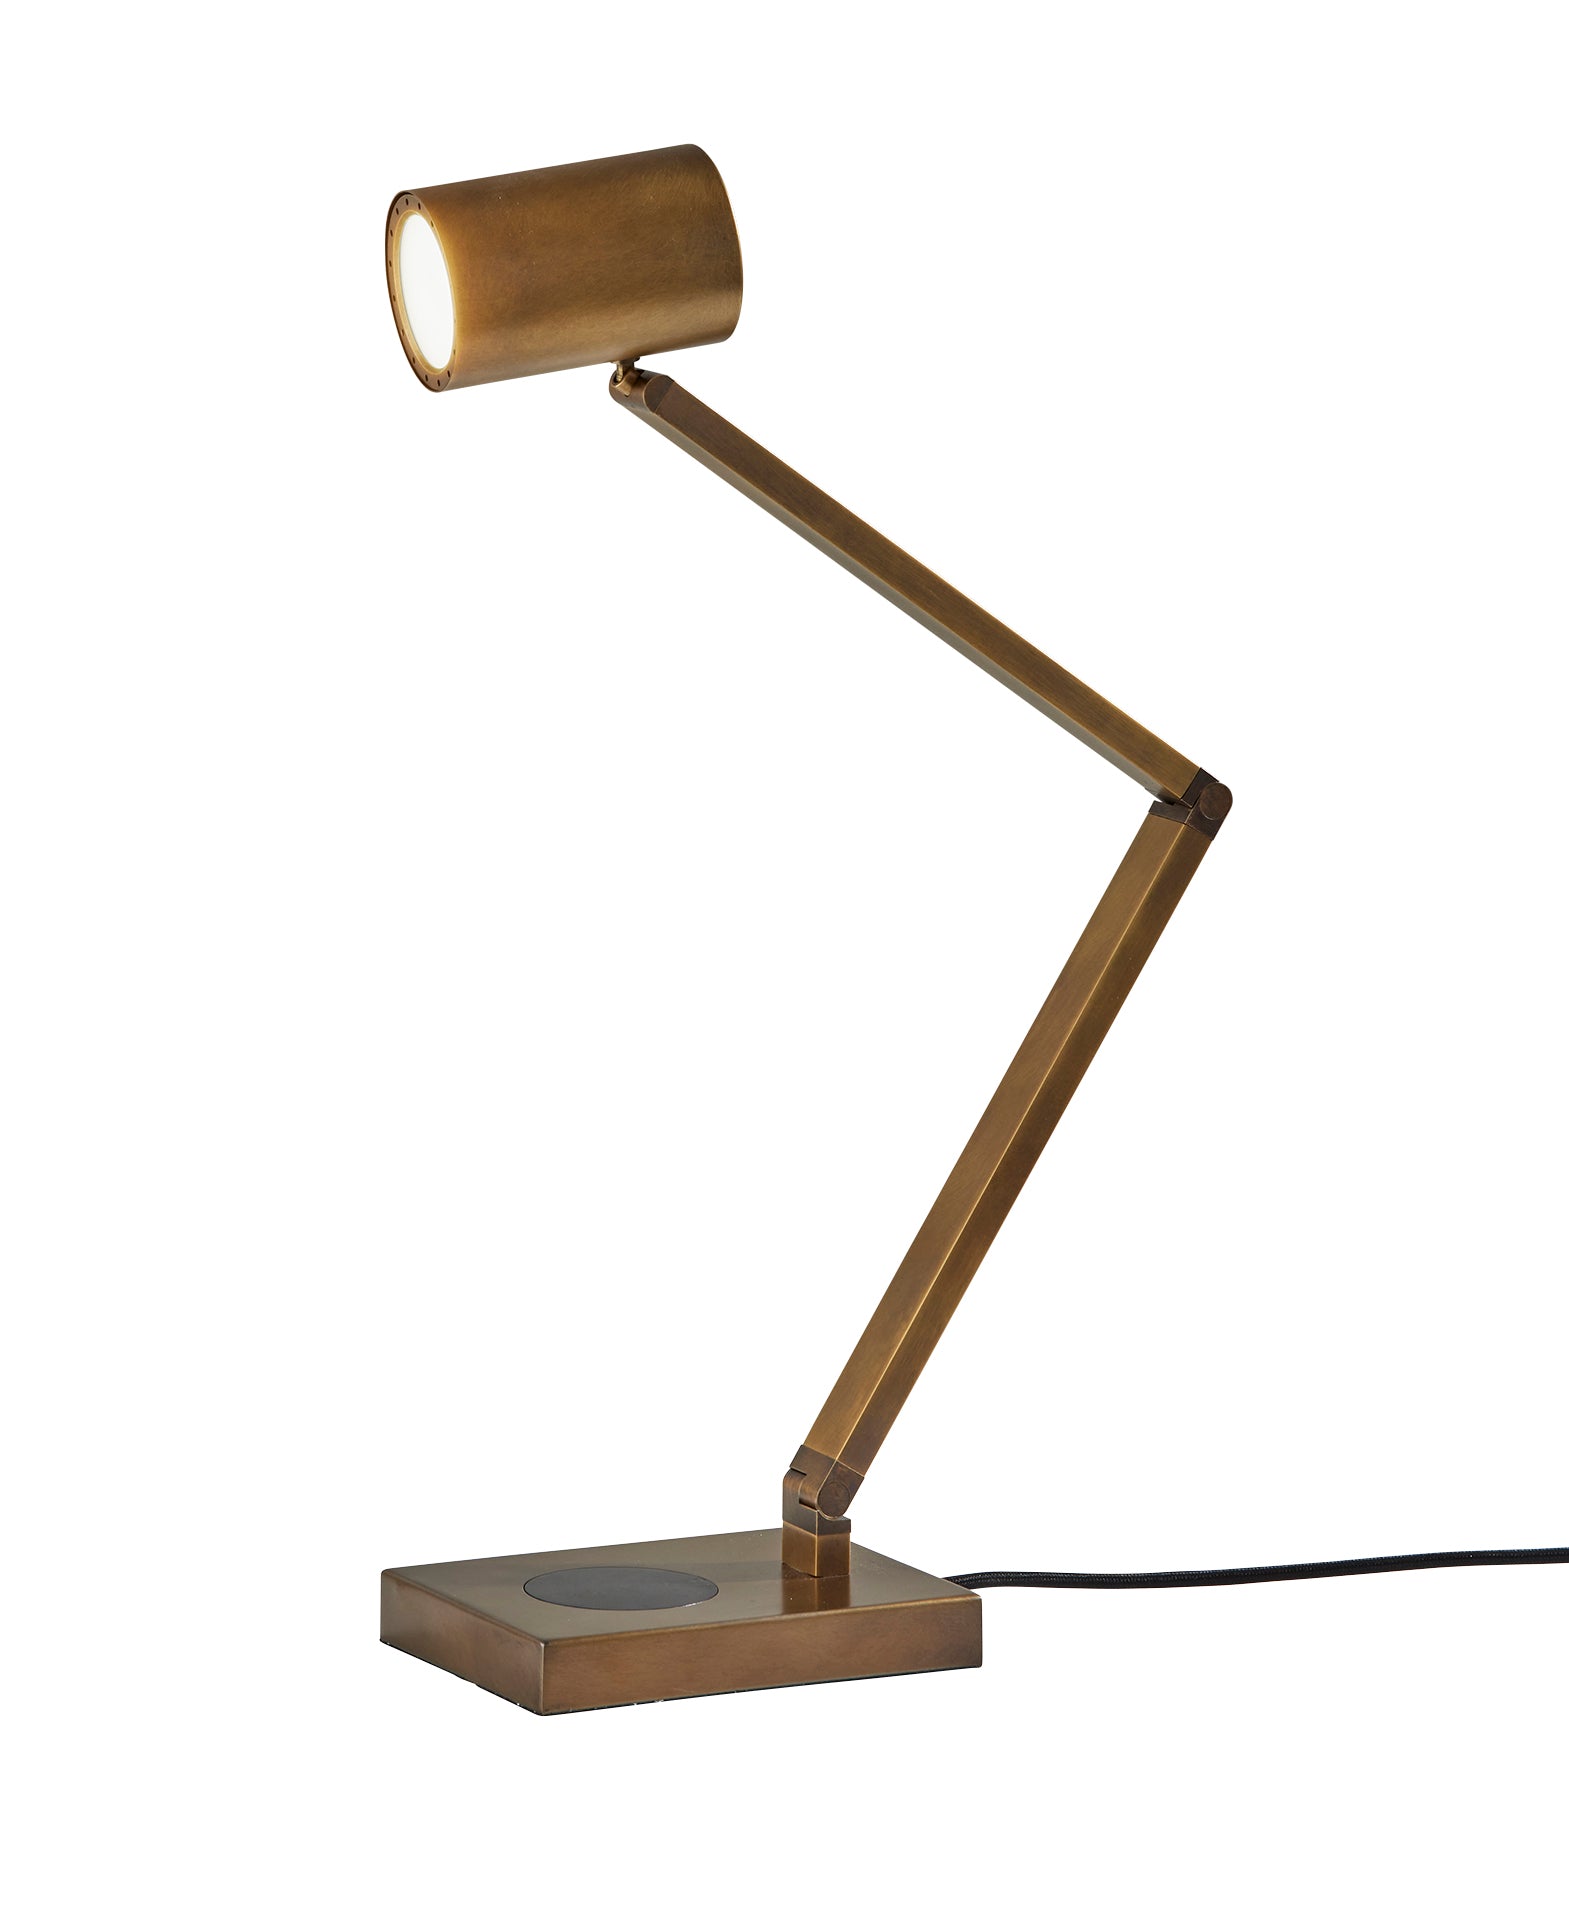 NEWMAN Lampe sur table Or - 10036311LBB | ADESSO